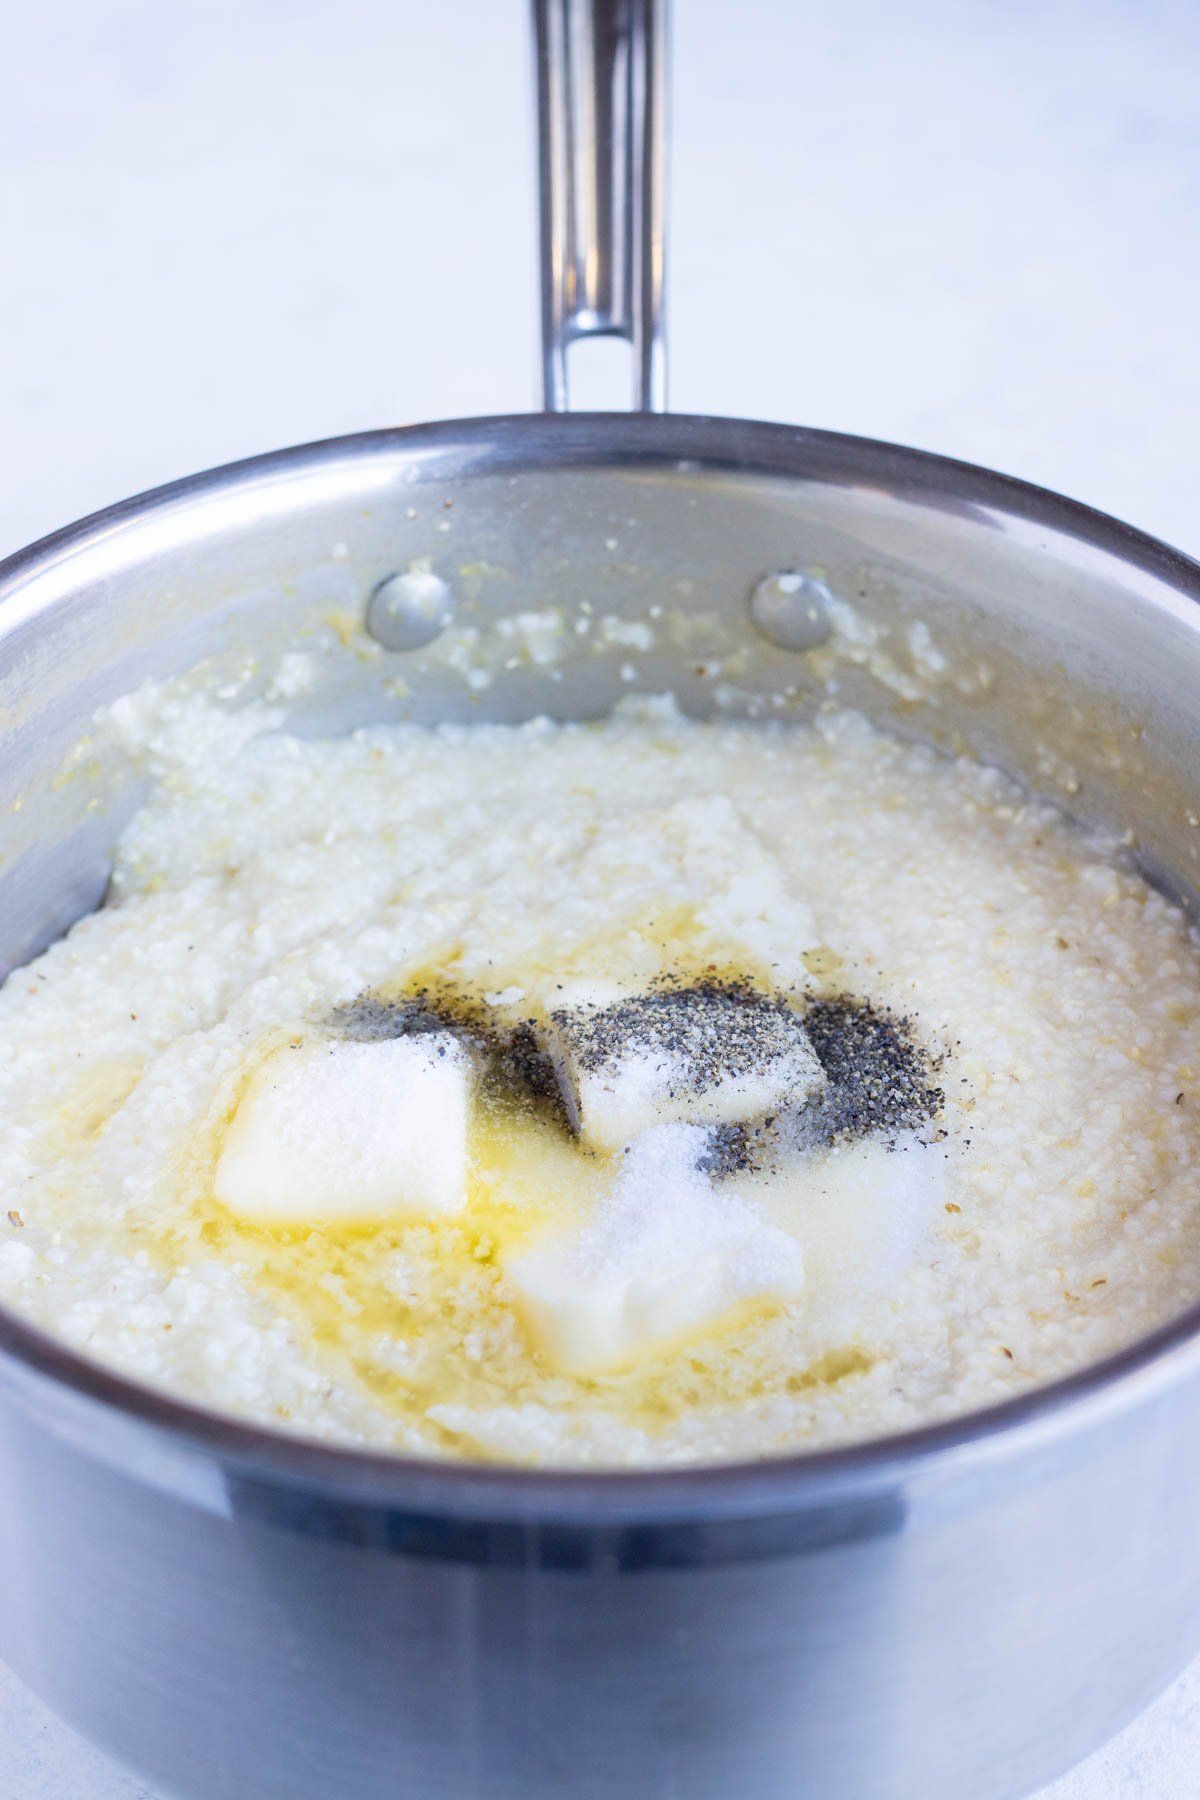 Grits and seasonings are cooked with butter on the stove.